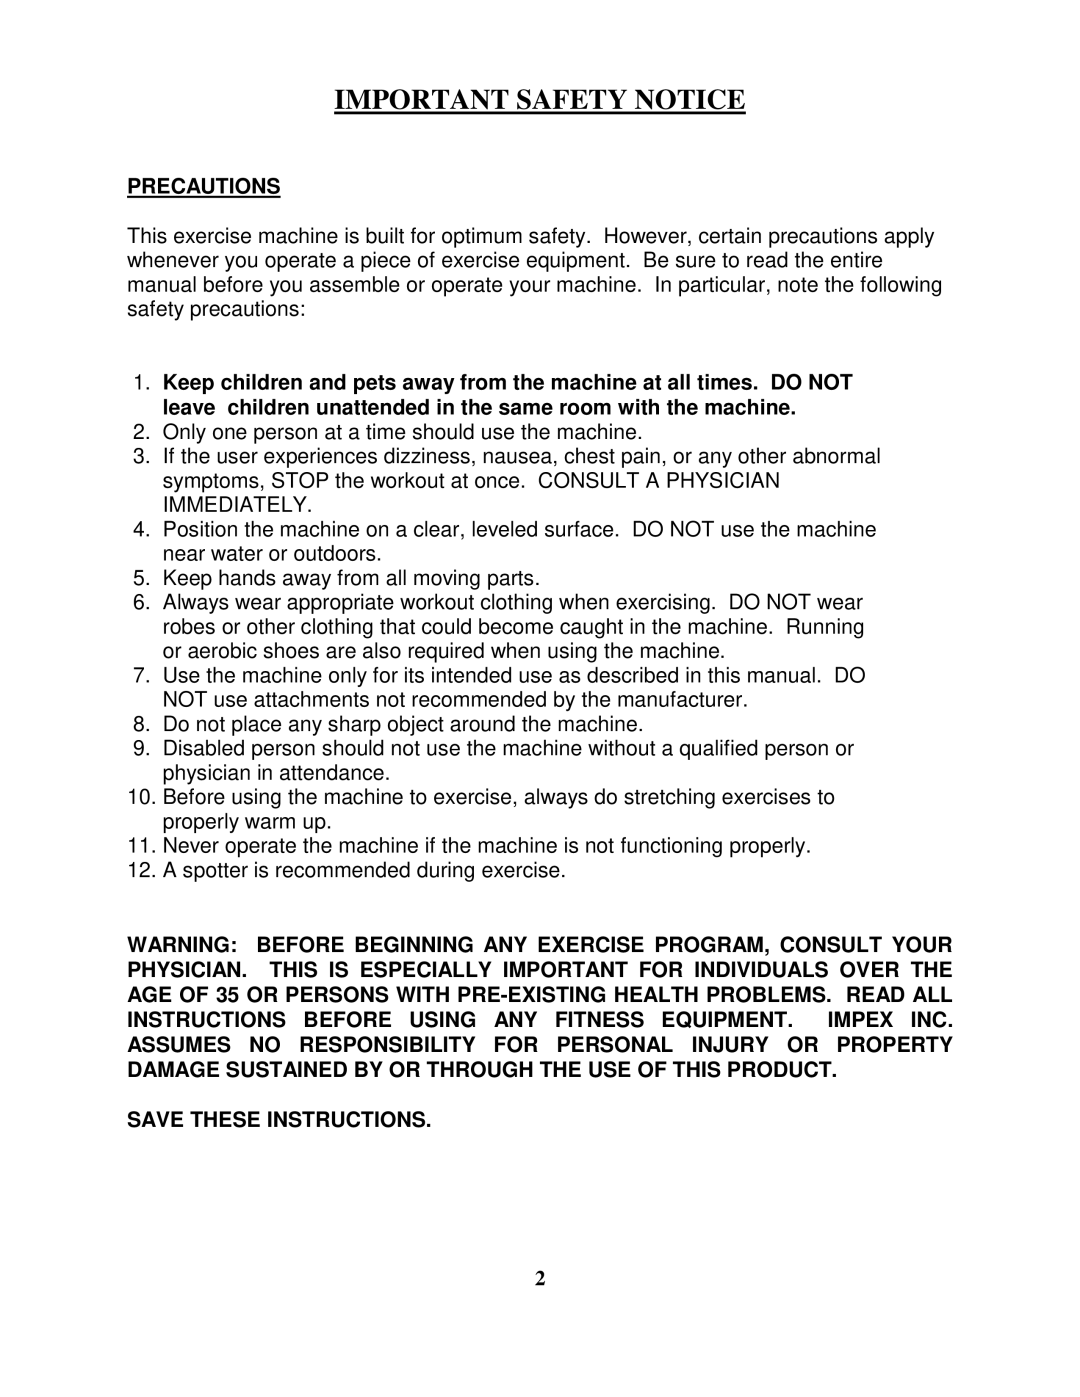 Impex SM 4000 manual Important Safety Notice 